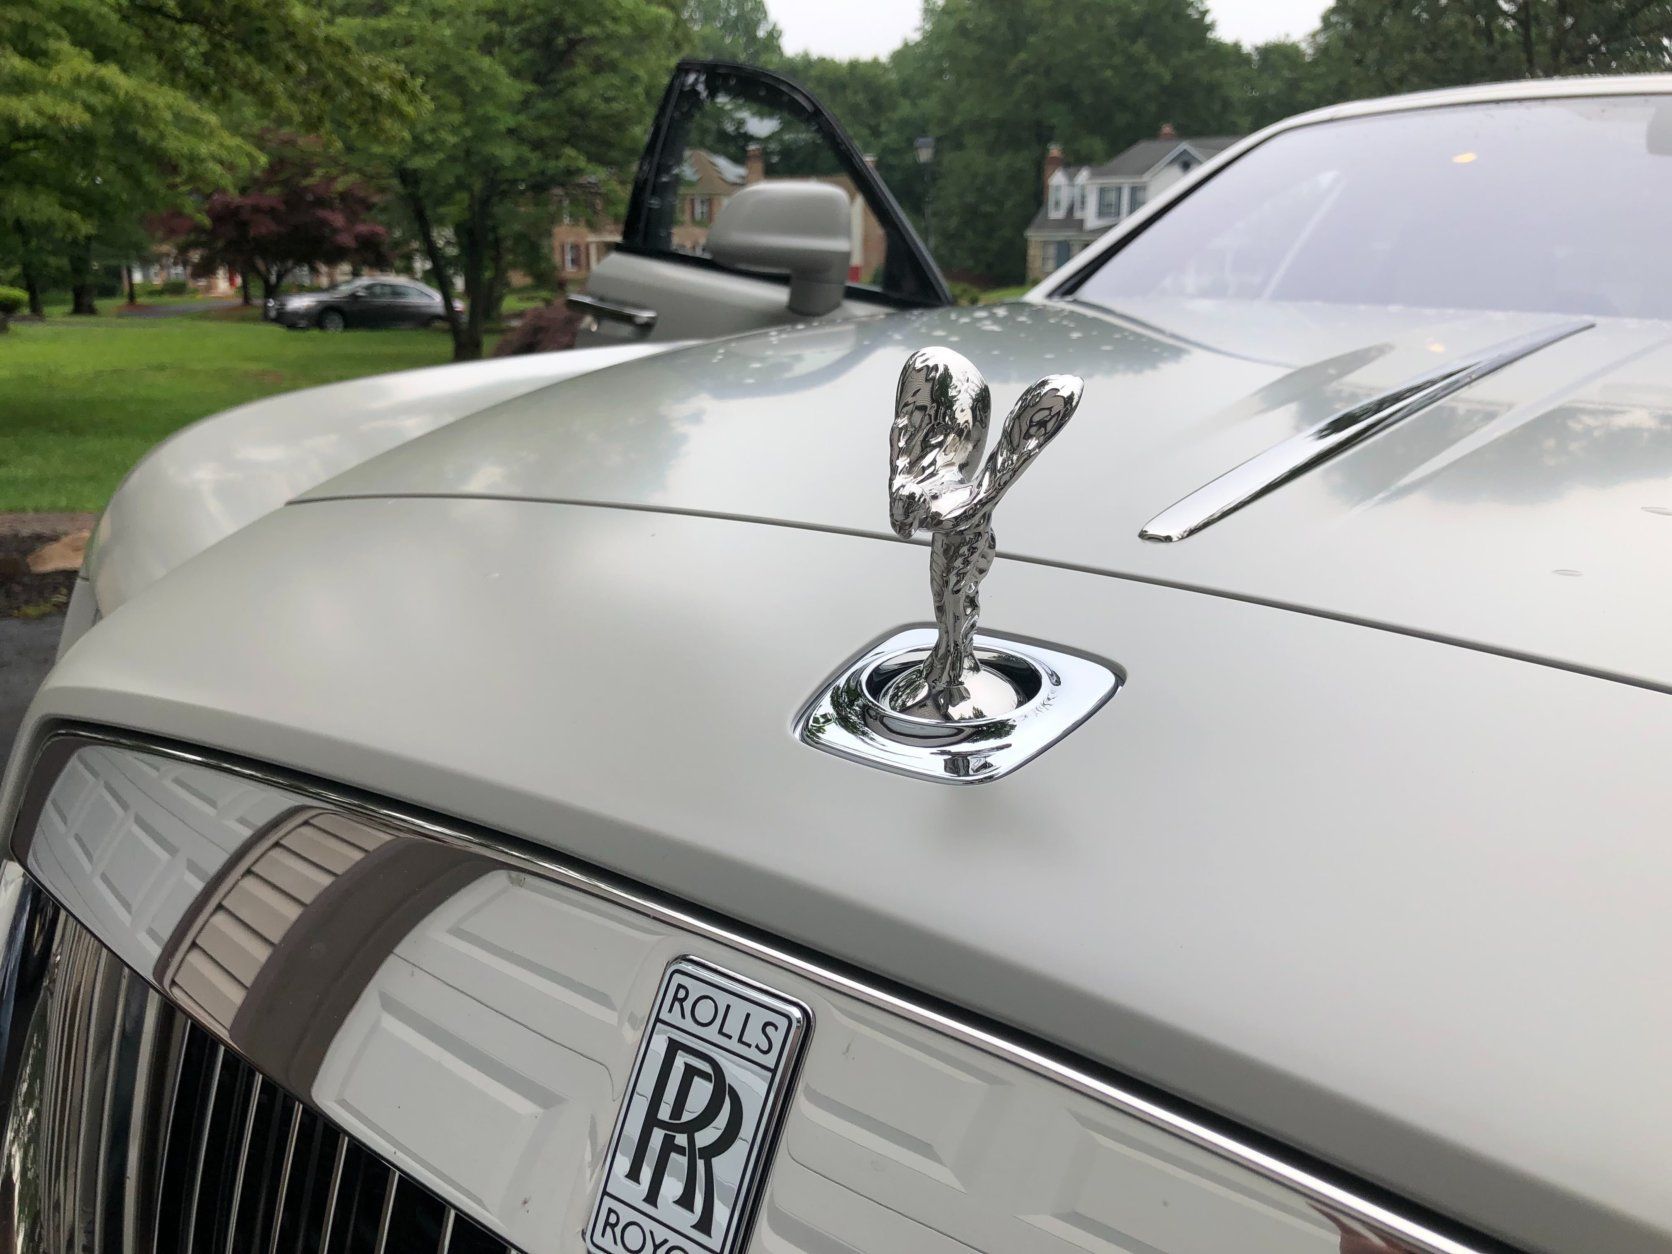 <p>I think Rolls-Royce was the originator of the larger front grill — it’s bright and rich-looking, made of metal with not a piece of plastic in sight.</p>
<p>The heritage of the brand is there, but the look is modern with LED lighting that gives a somewhat sleek front face. The hood is long and the Spirit of Ecstasy is front-and-center and retracts when parked or with a touch of a button.</p>
